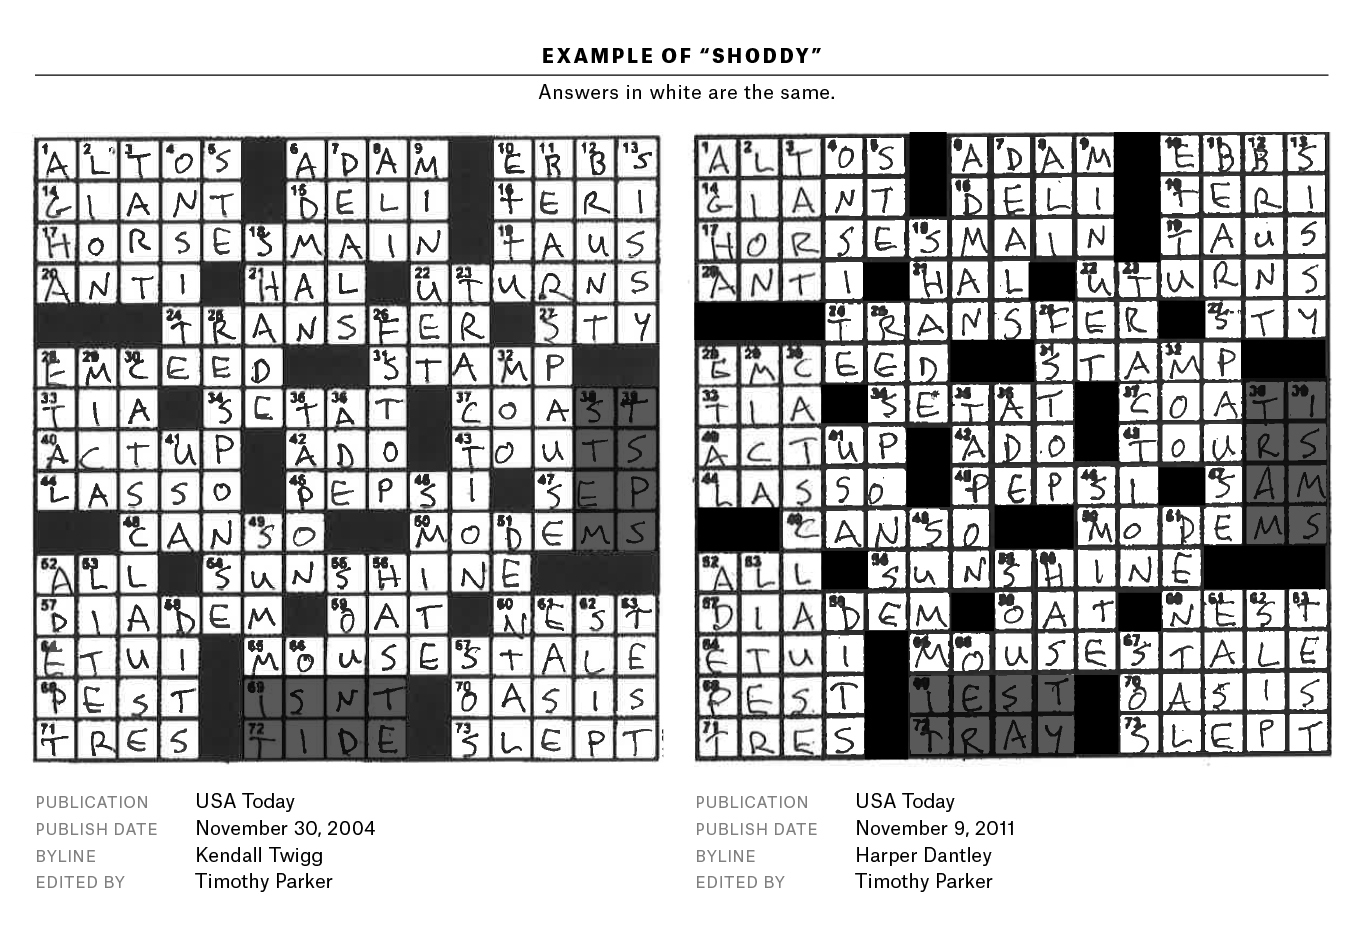 A Plagiarism Scandal Is Unfolding In The Crossword World - Printable Wall Street Journal Crossword Puzzle